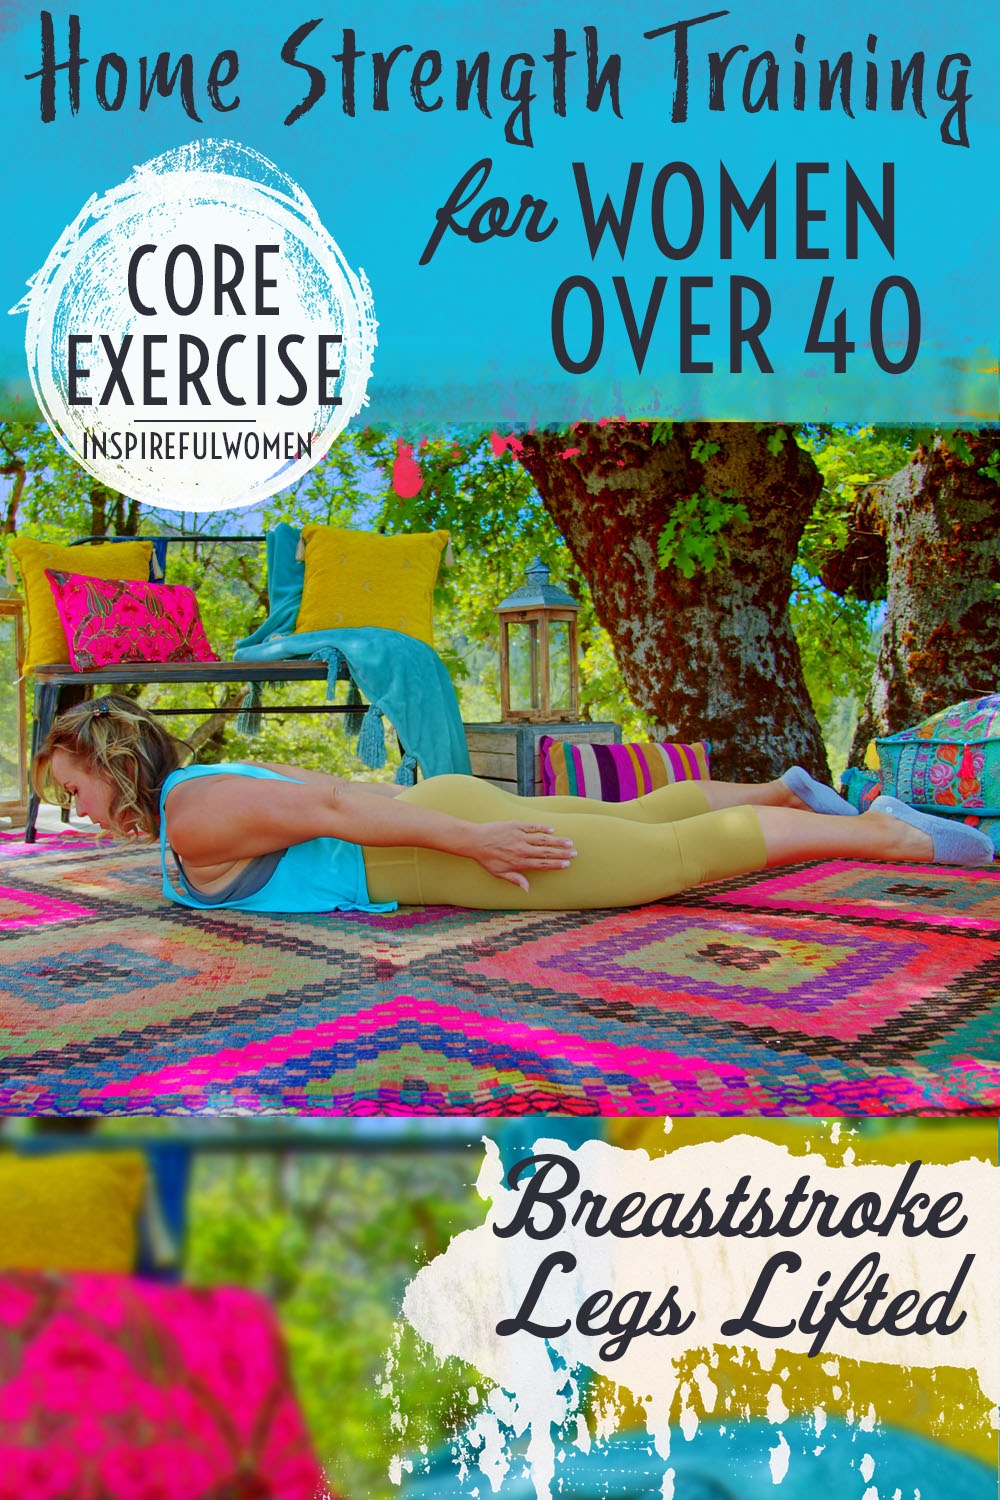 breaststroke-legs-lifted-laying-down-pilates-core-back-strength-exercise-women-40+